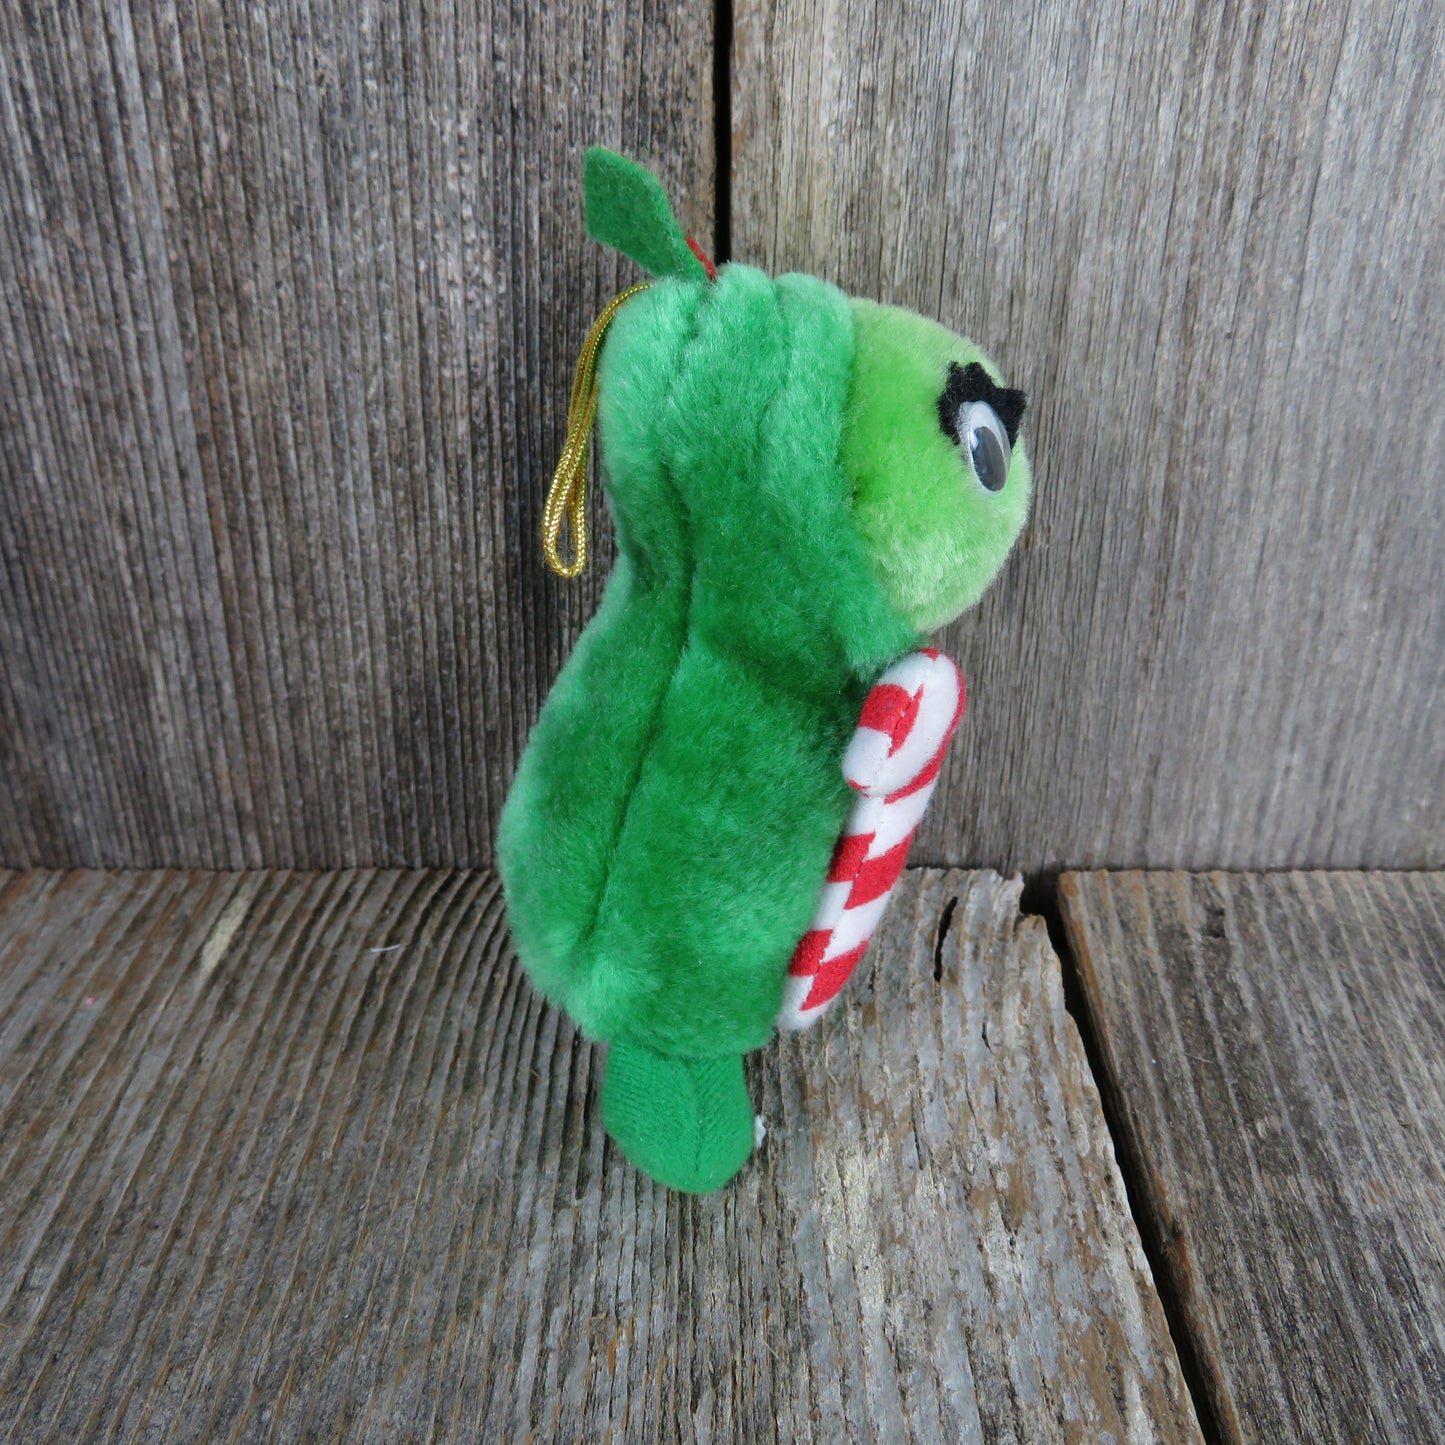 Vintage Peas Ornament Plush Christmas Yumkins Del Monte Fruit and Vegetables 1991 Green Candy Cane - At Grandma's Table